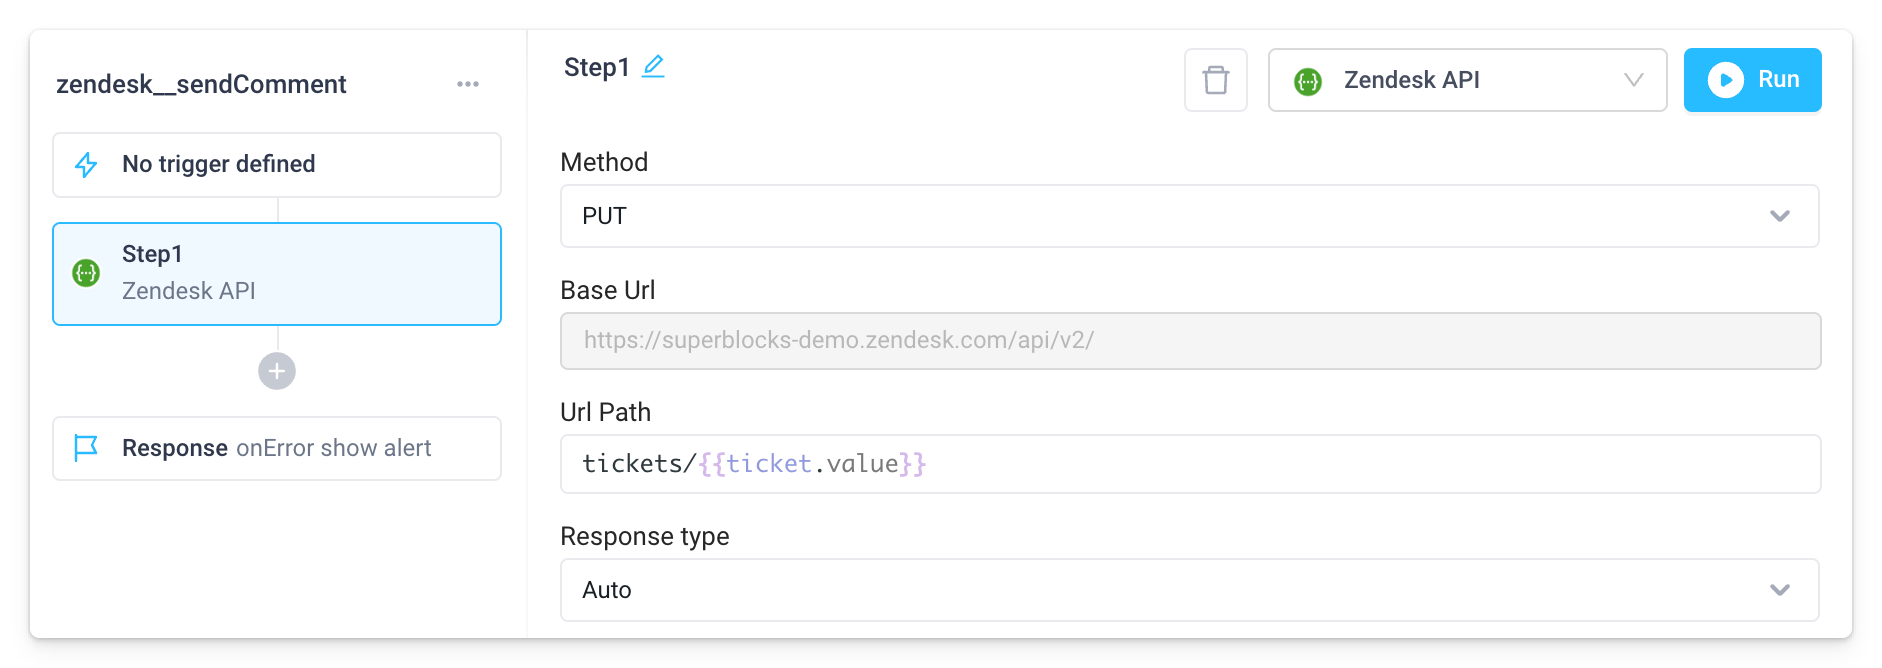 Use the Zendesk REST integration in an API step to update the ticket with the AI-generated response.